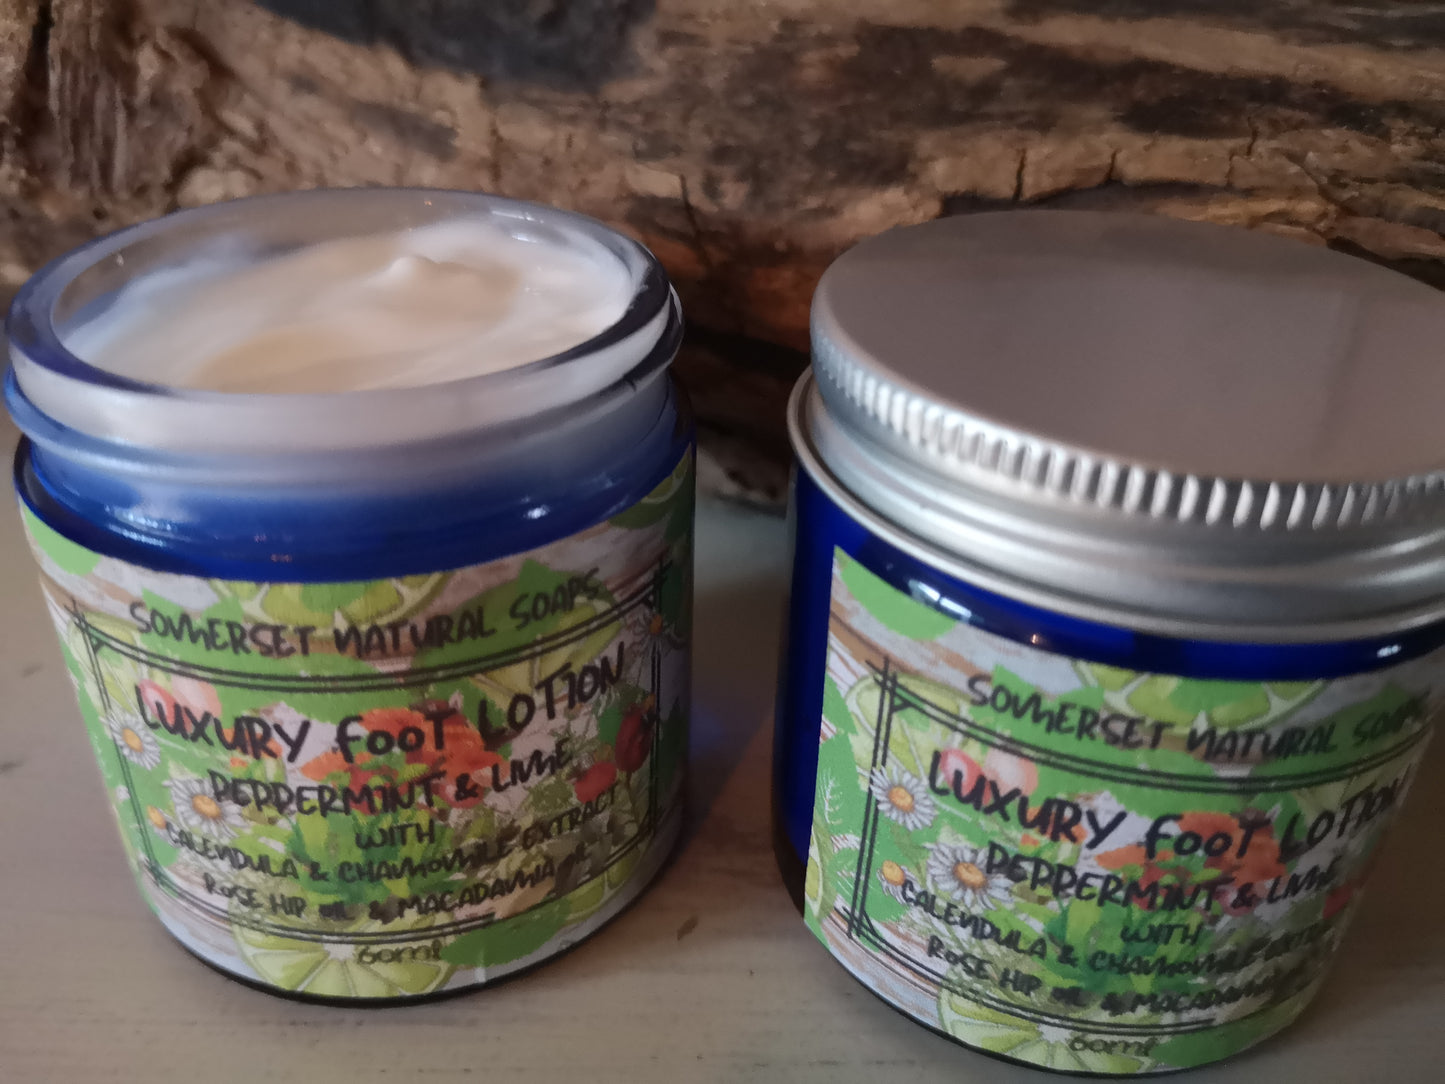 Luxury Foot Lotion Peppermint & Lime